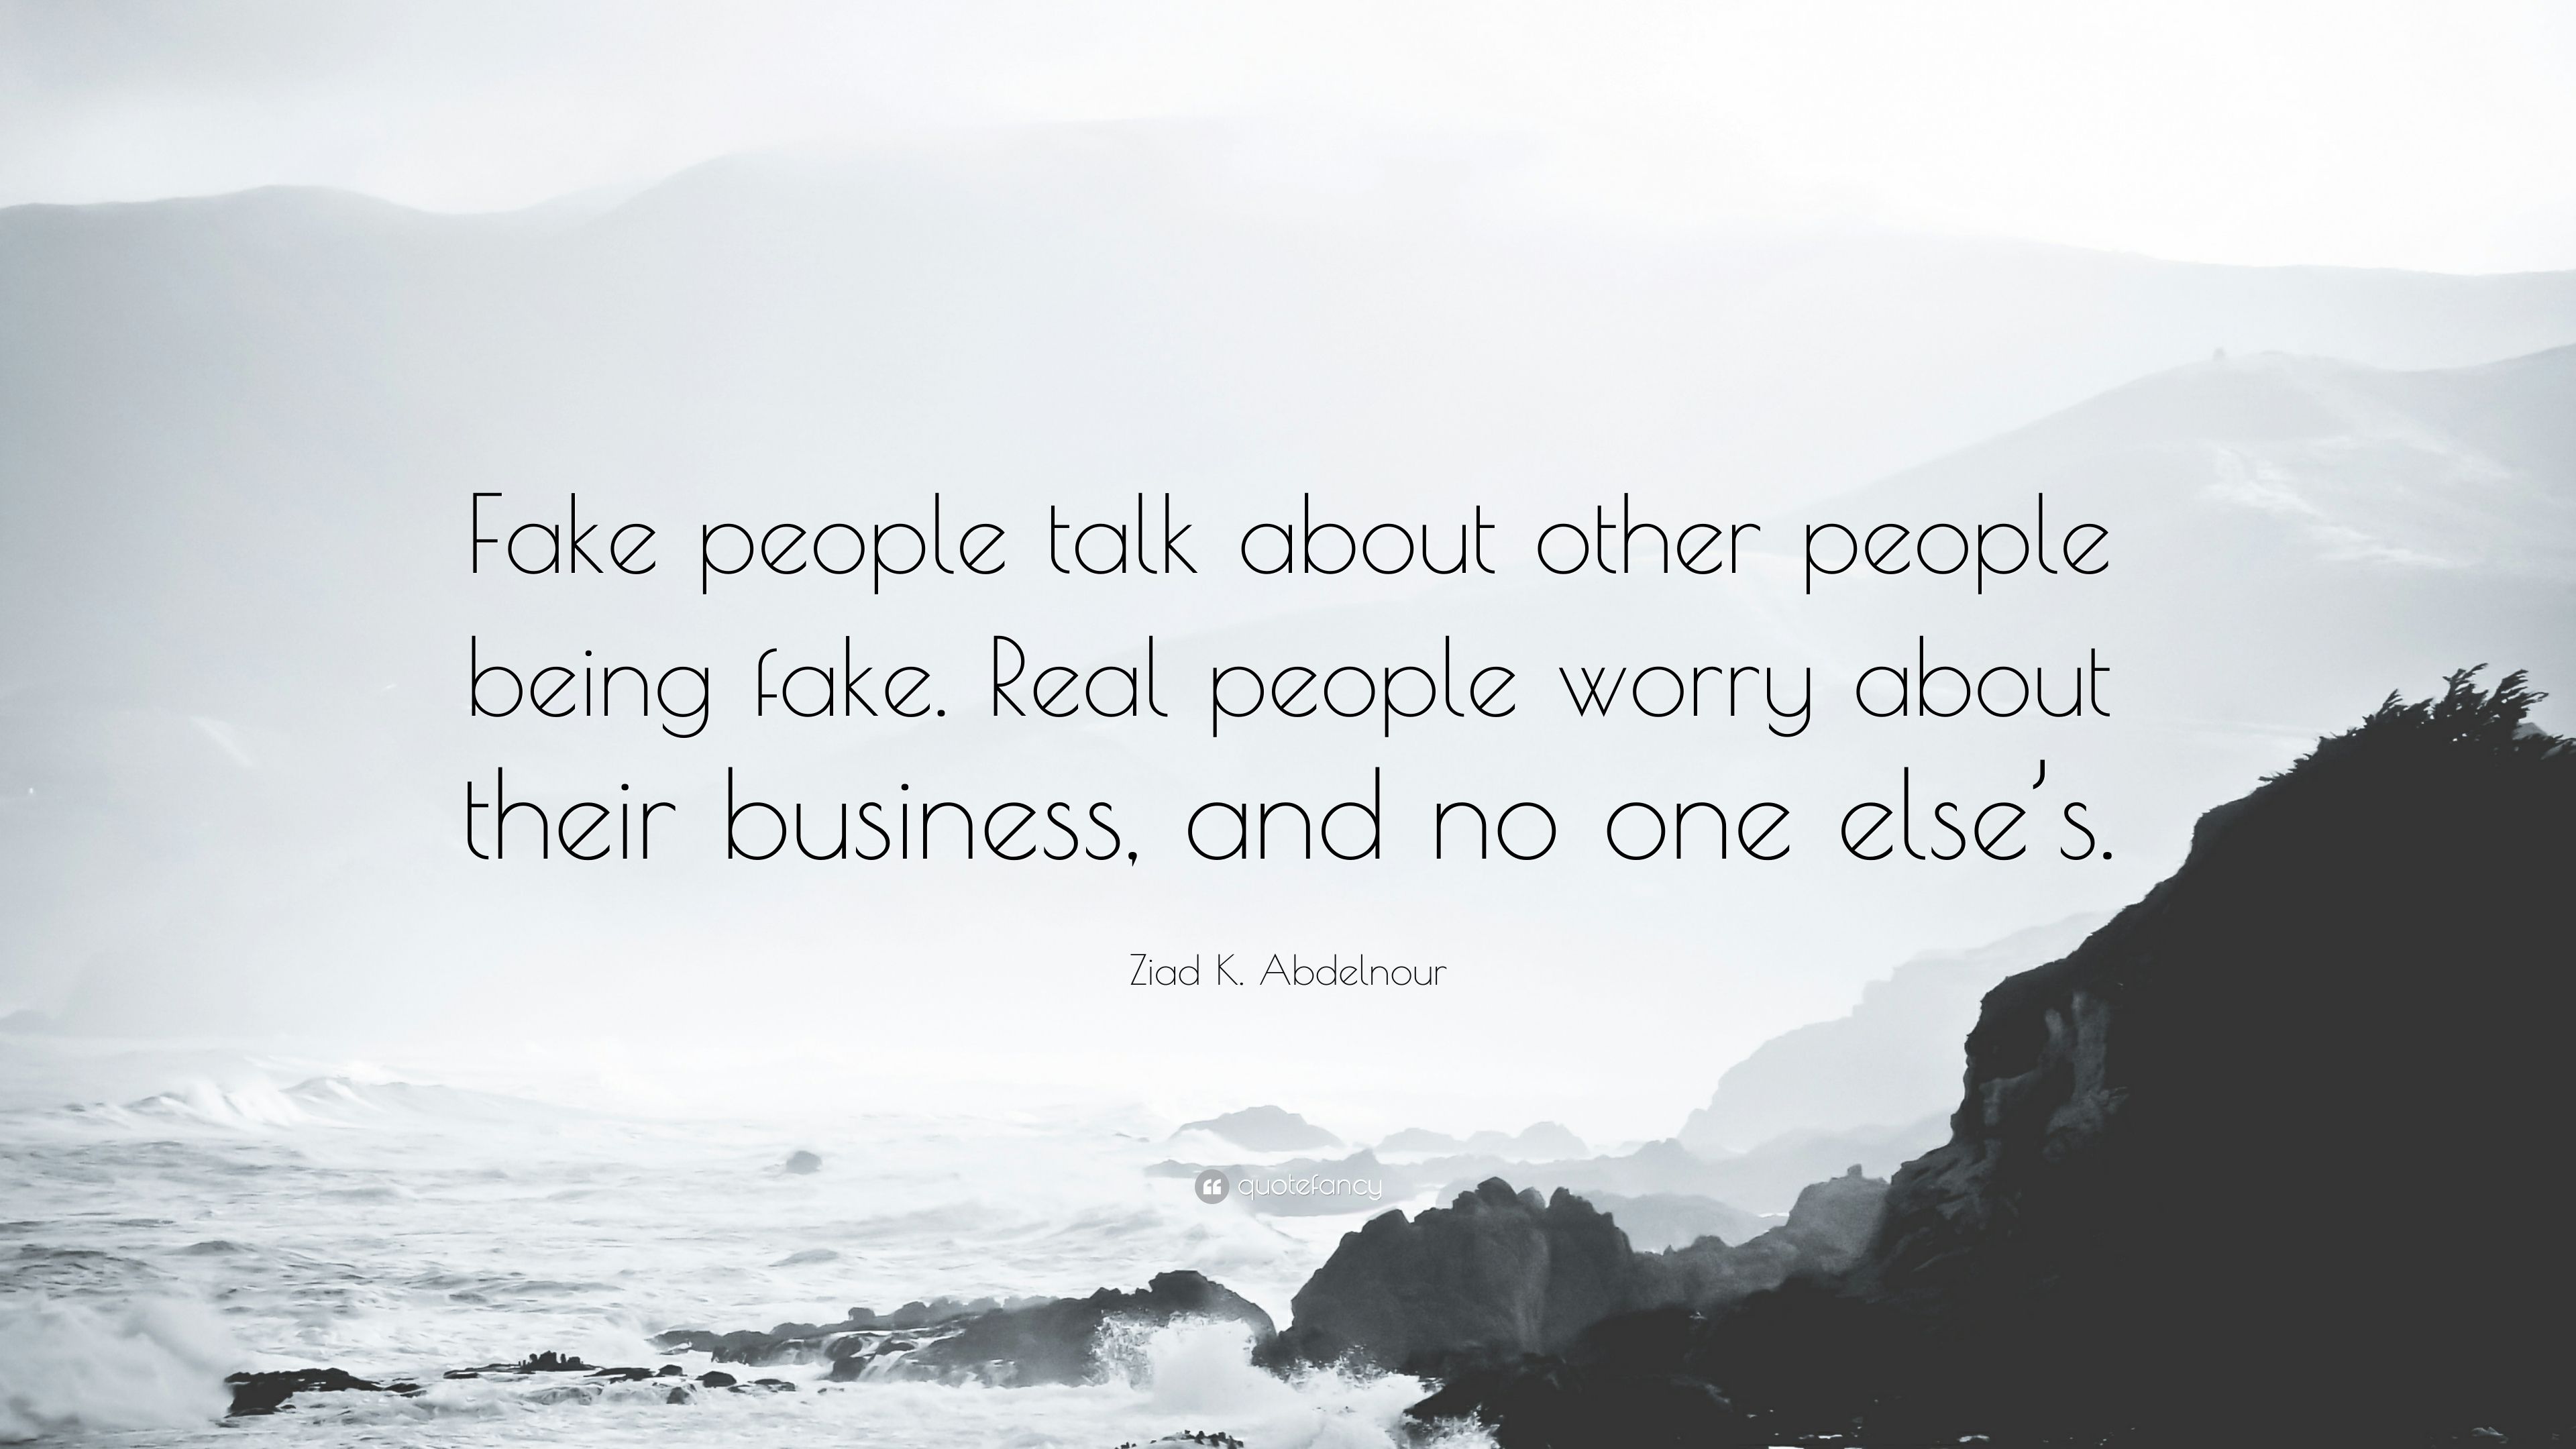 Ziad K. Abdelnour Quote: “Fake people talk about other people being fake. Real people worry about their business, and no one else's.” (9 wallpaper)